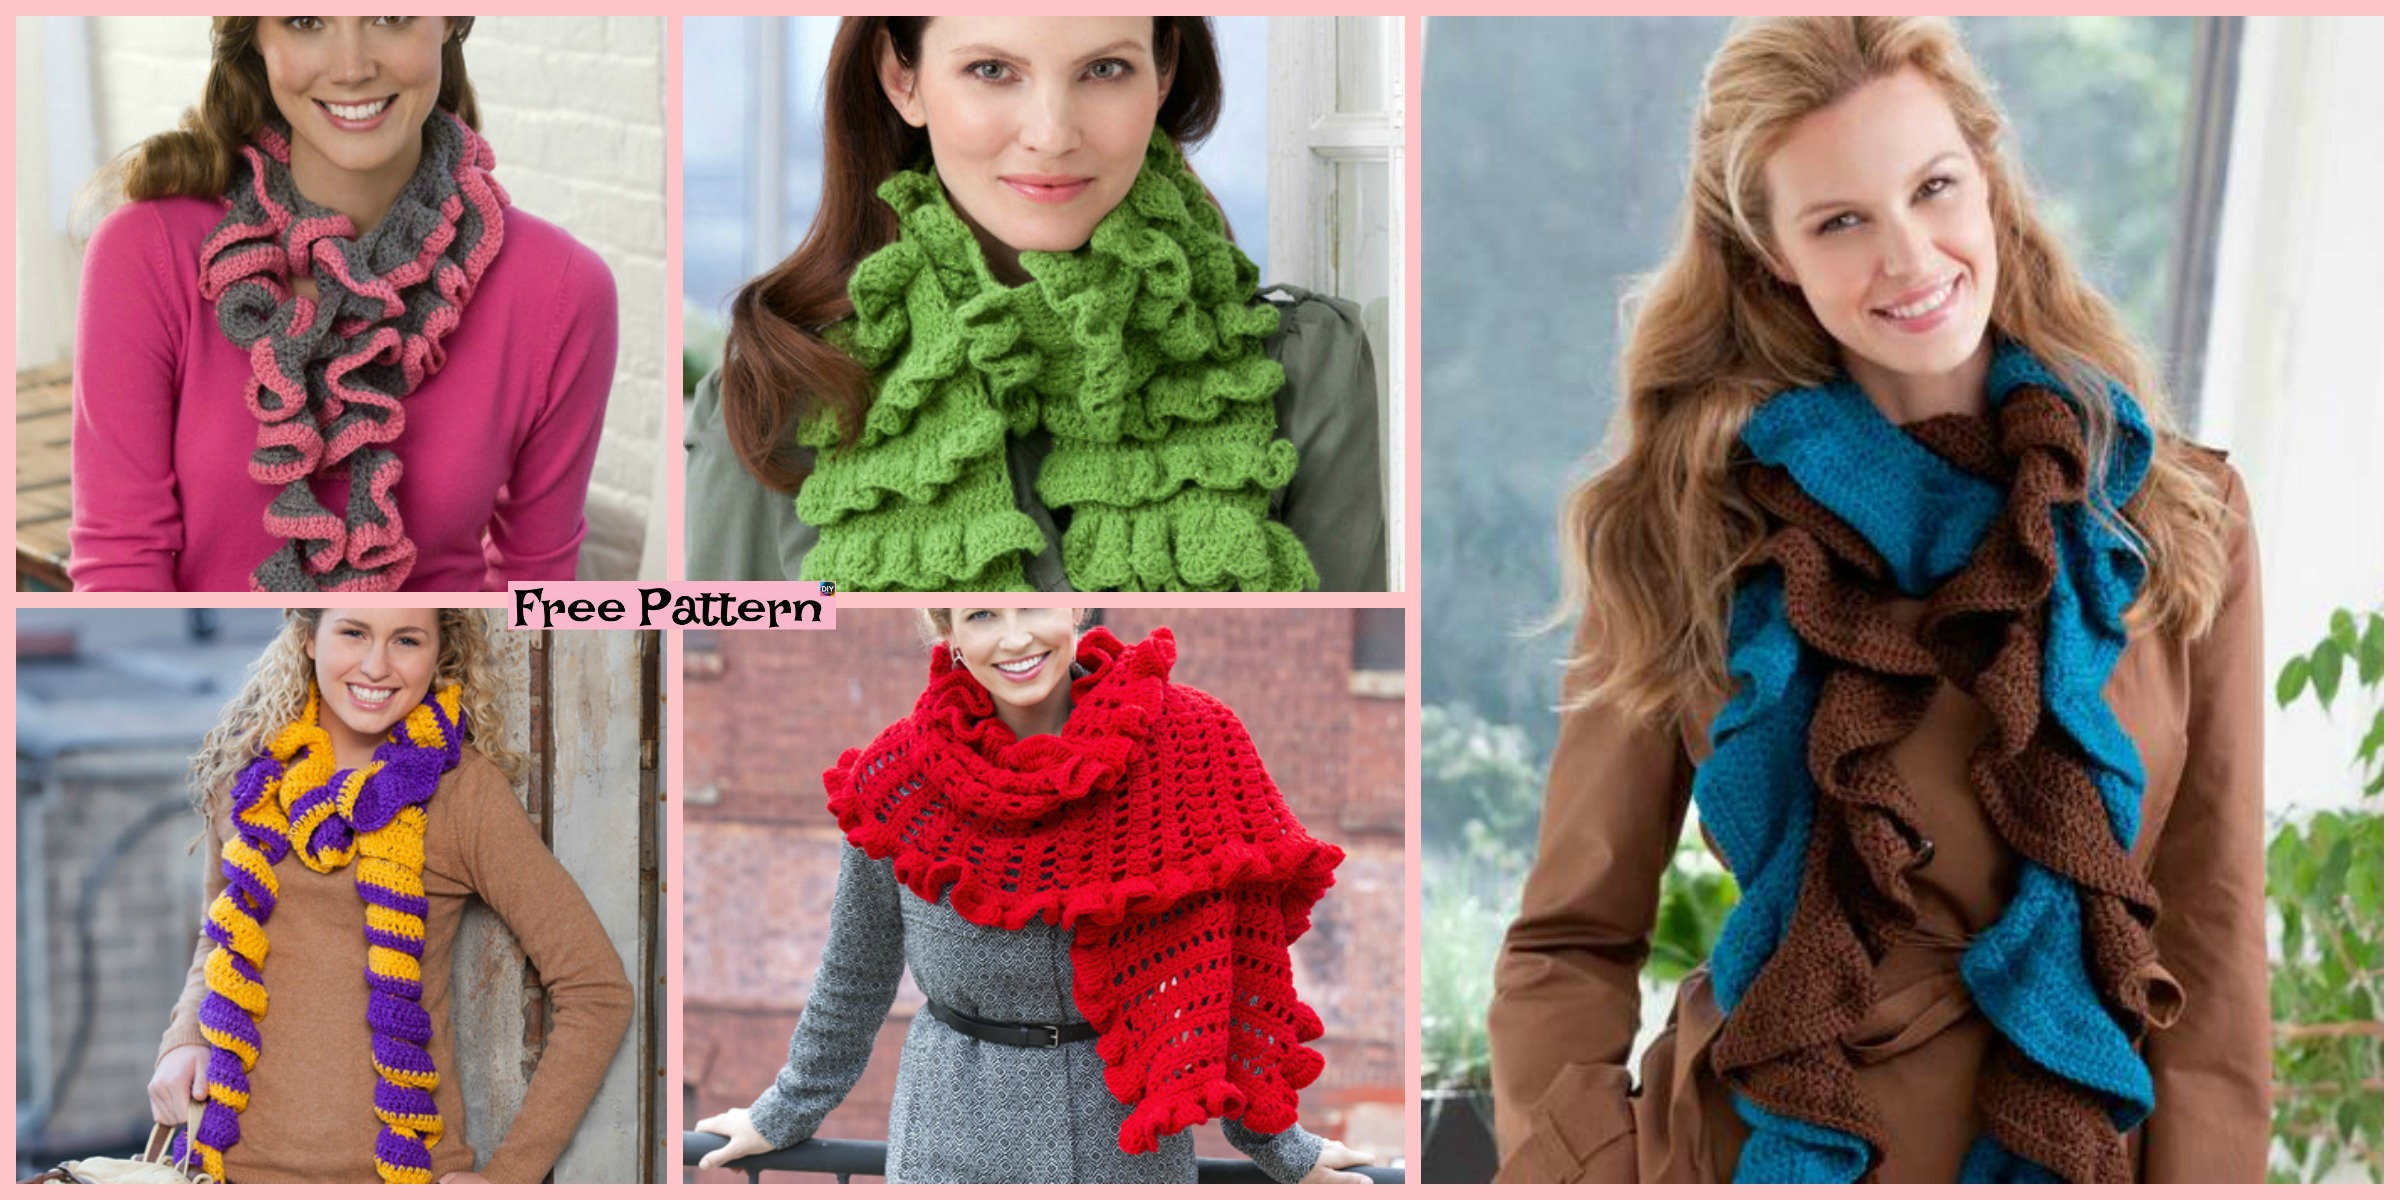 How To Knit A Ruffle Scarf Free Pattern 6 Beautiful Crochet Ruffled Scarf Free Patterns Diy 4 Ever